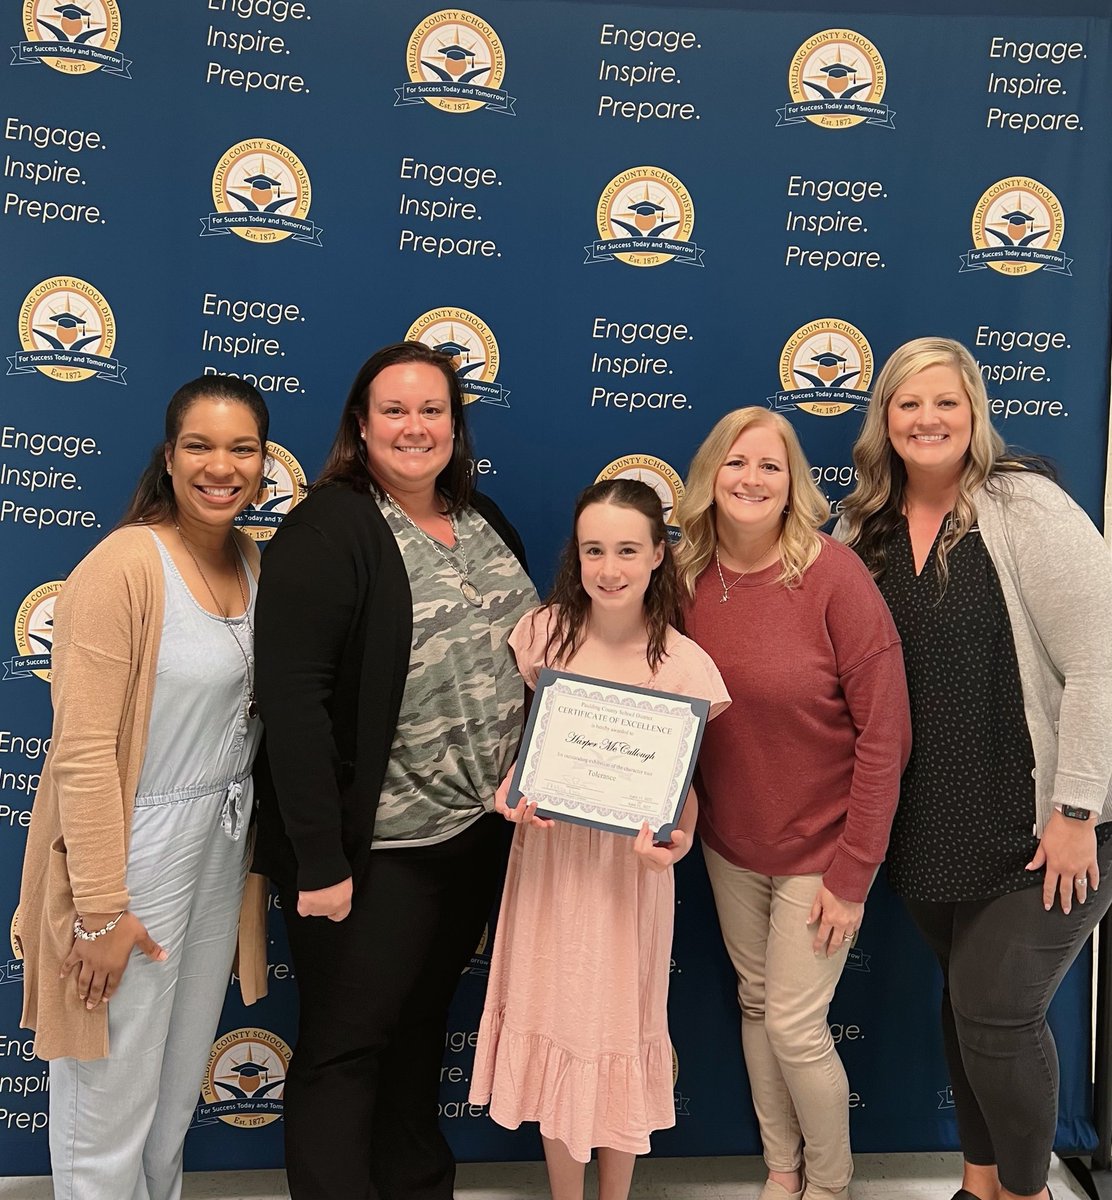 Congratulations to Harper McCullough, who won the County Character award for 'Tolerance'! She was recognized at the board meeting this evening. We are all so proud that Harper is a Baggett Bear! 🐻 #PCSDproud